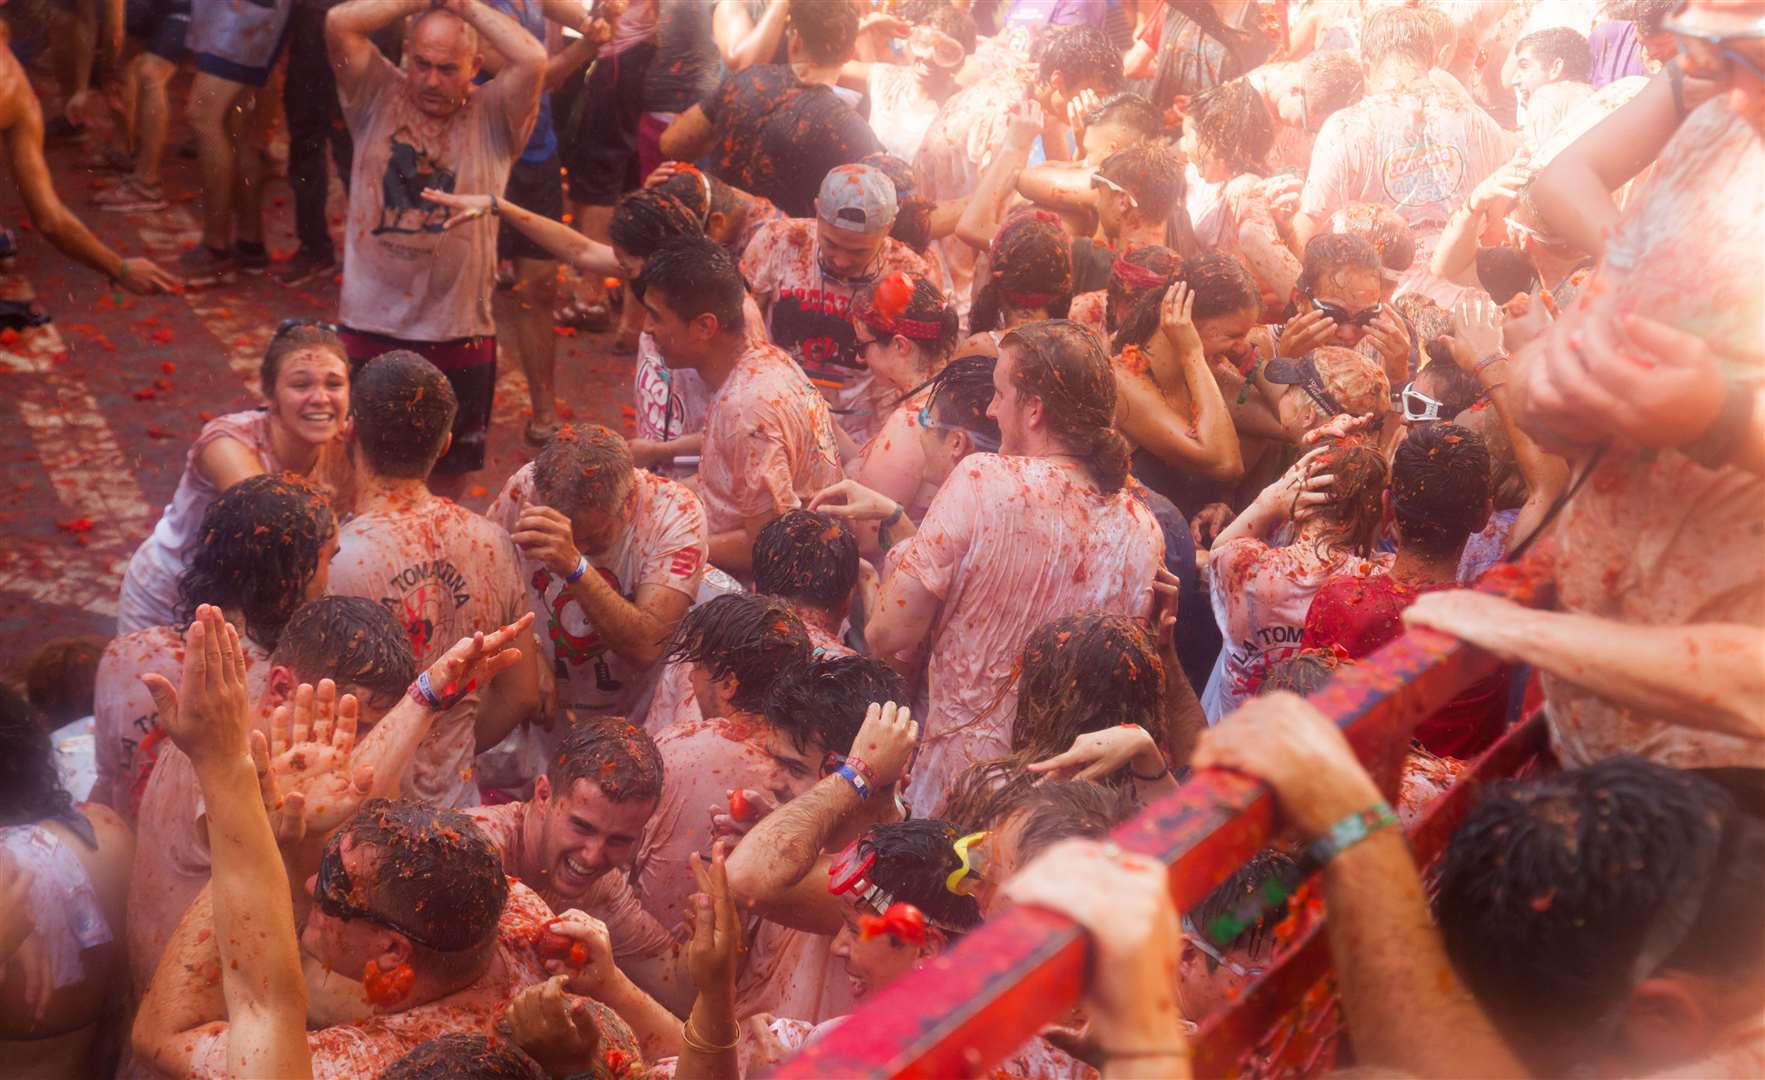 La Tomatina festival in the Spanish town of Bunol in 2018 where people throw tomatoes. The Weald Rural Games will have its own version. Picture: iStock/Jack F